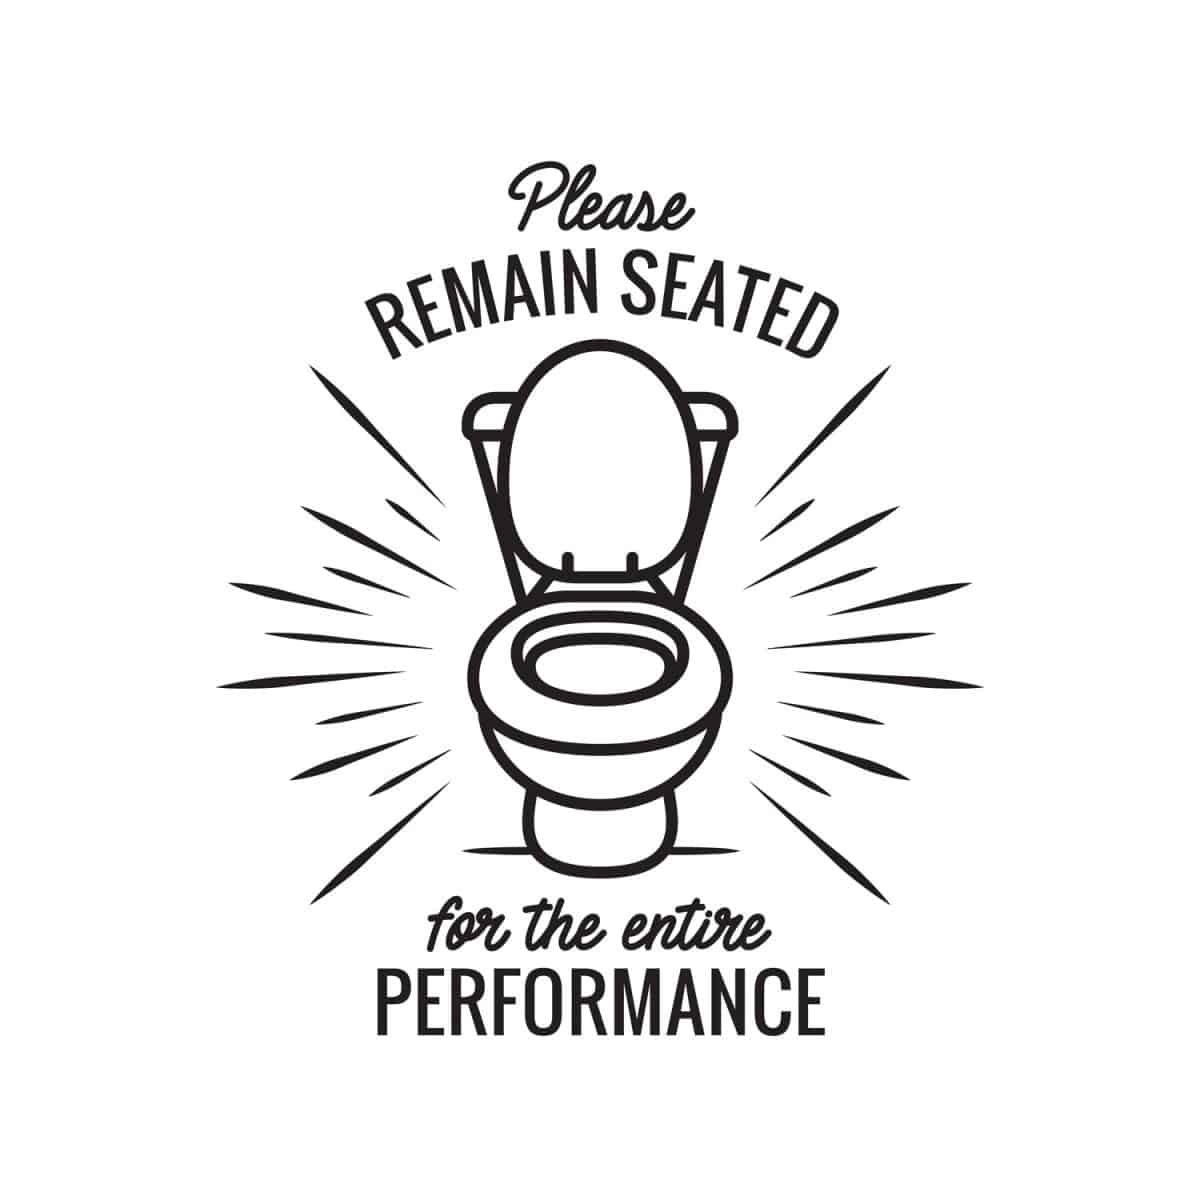 Please remain seated bathroom funny poster. Vector illustration.